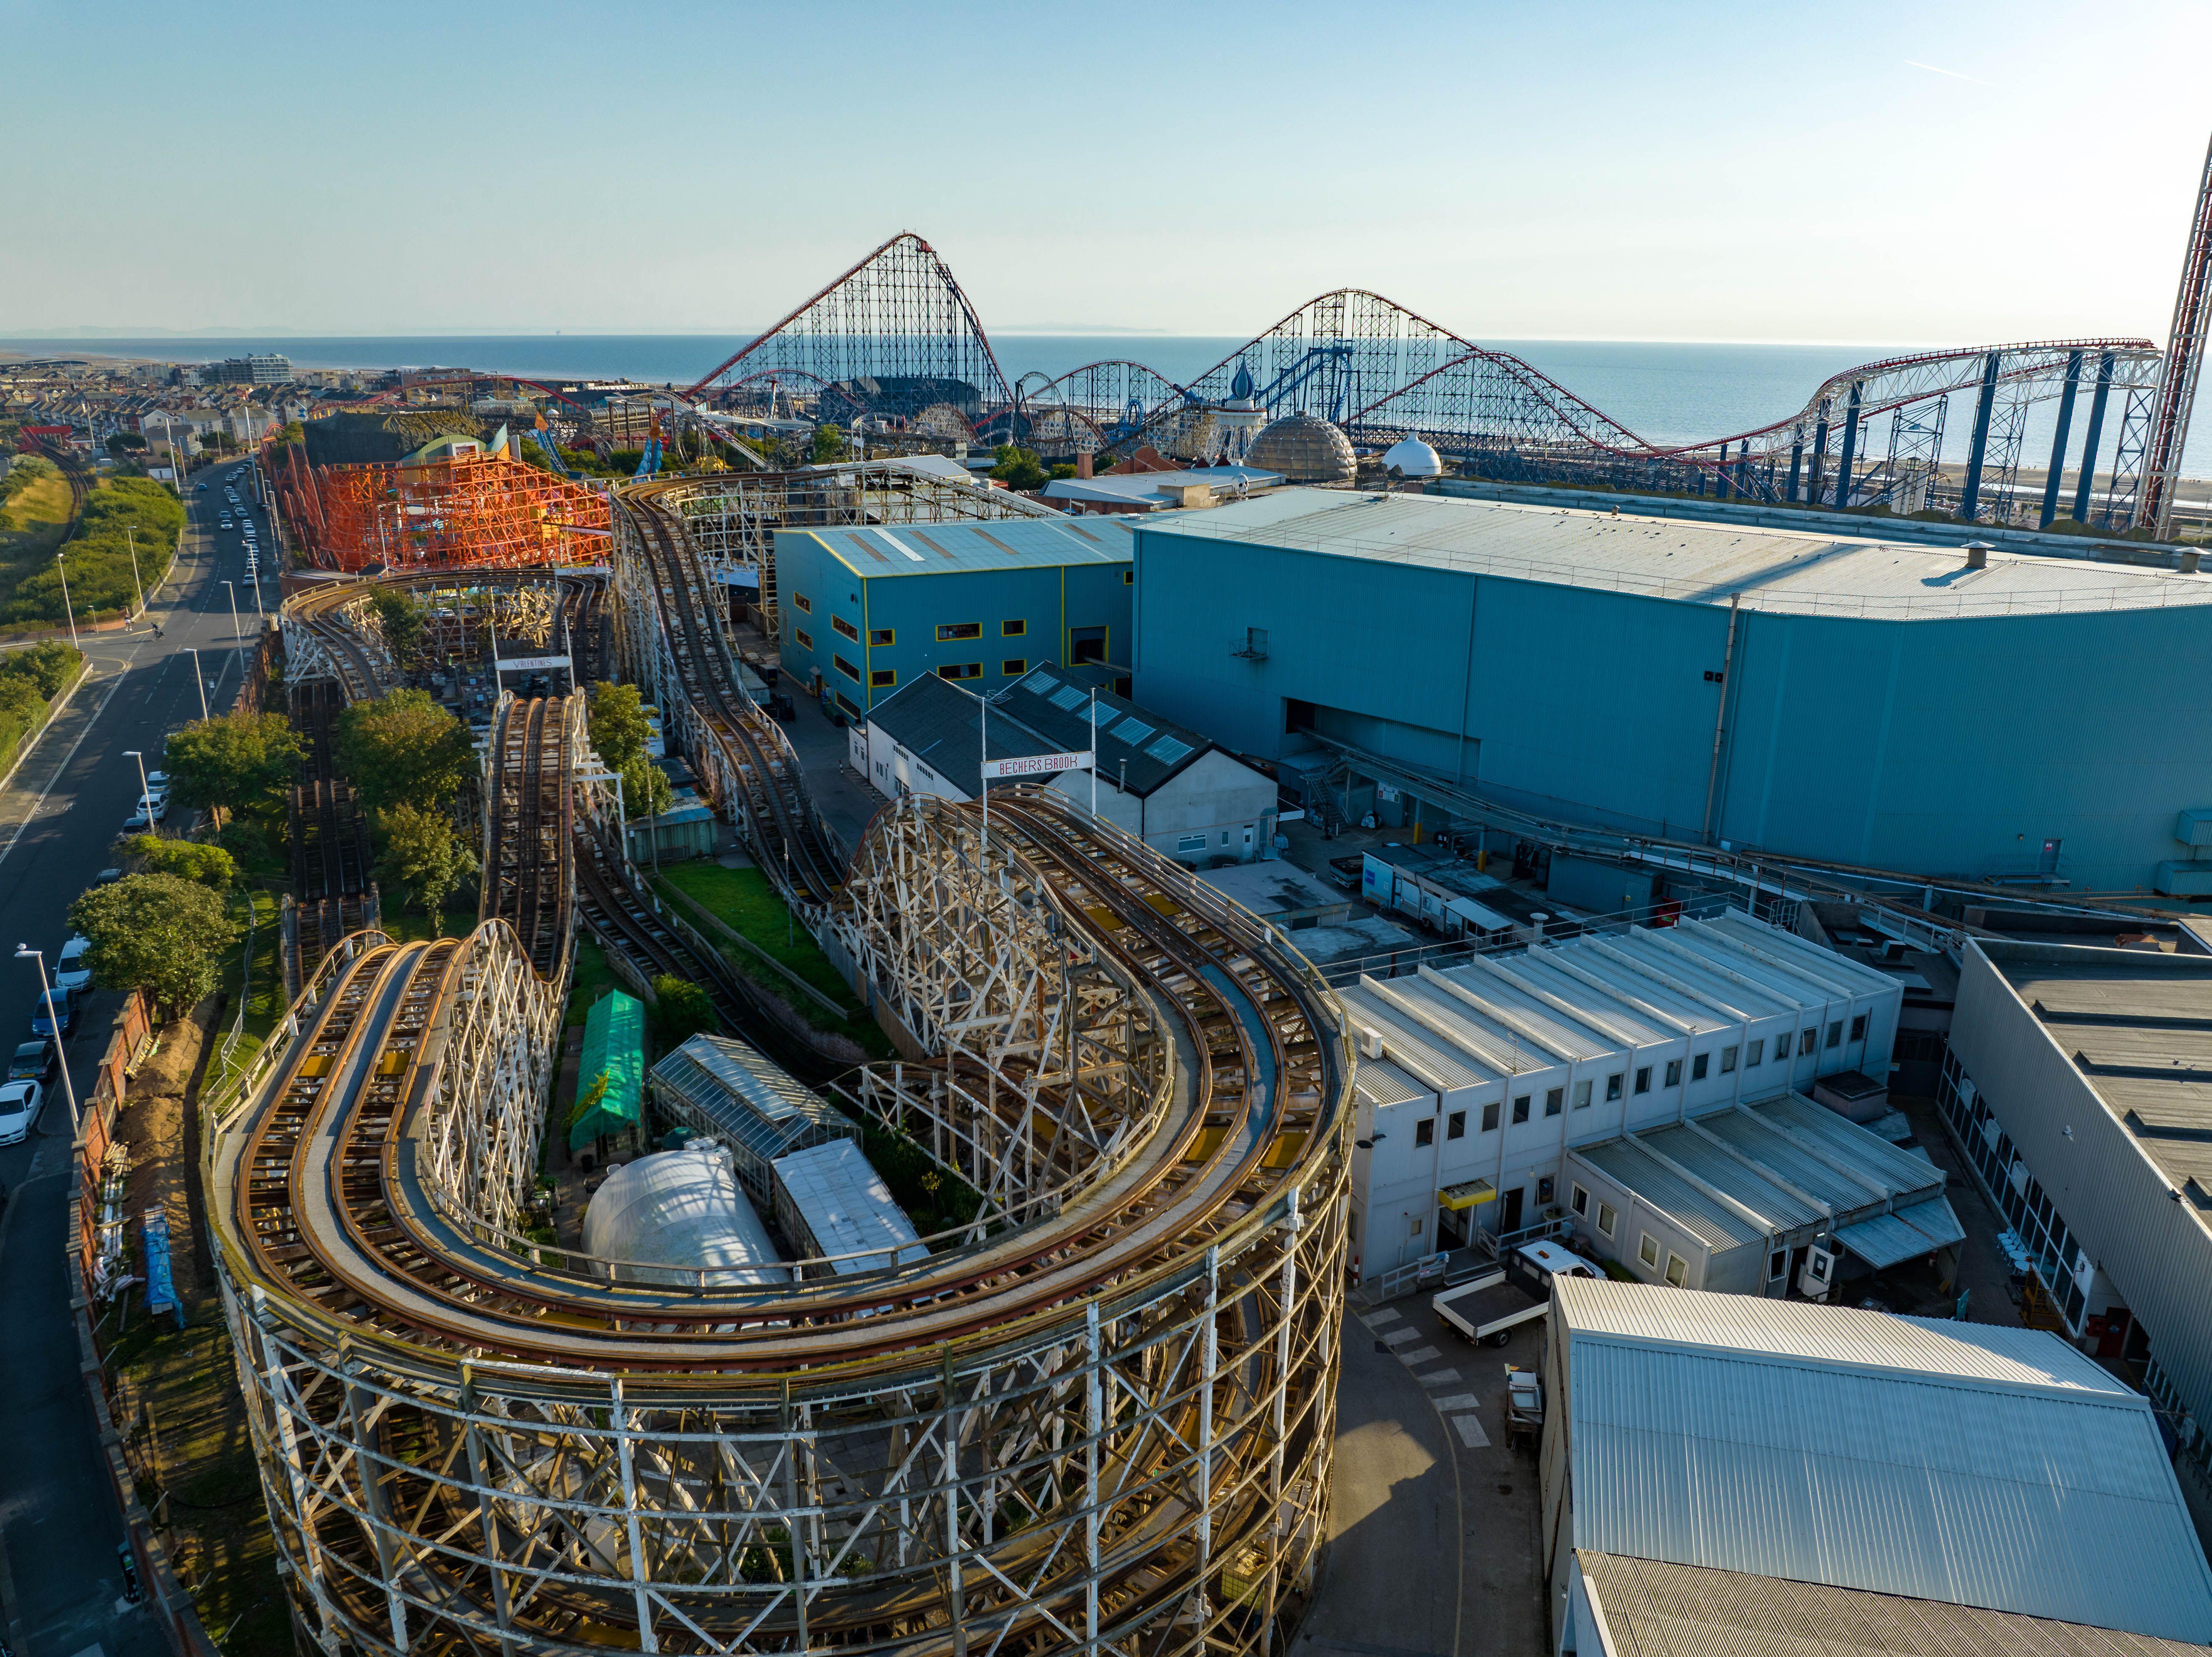 Blackpool Pleasure Beach is home to plenty of record-breaking rollercoasters, including the UK’s tallest rollercoaster, The Big One